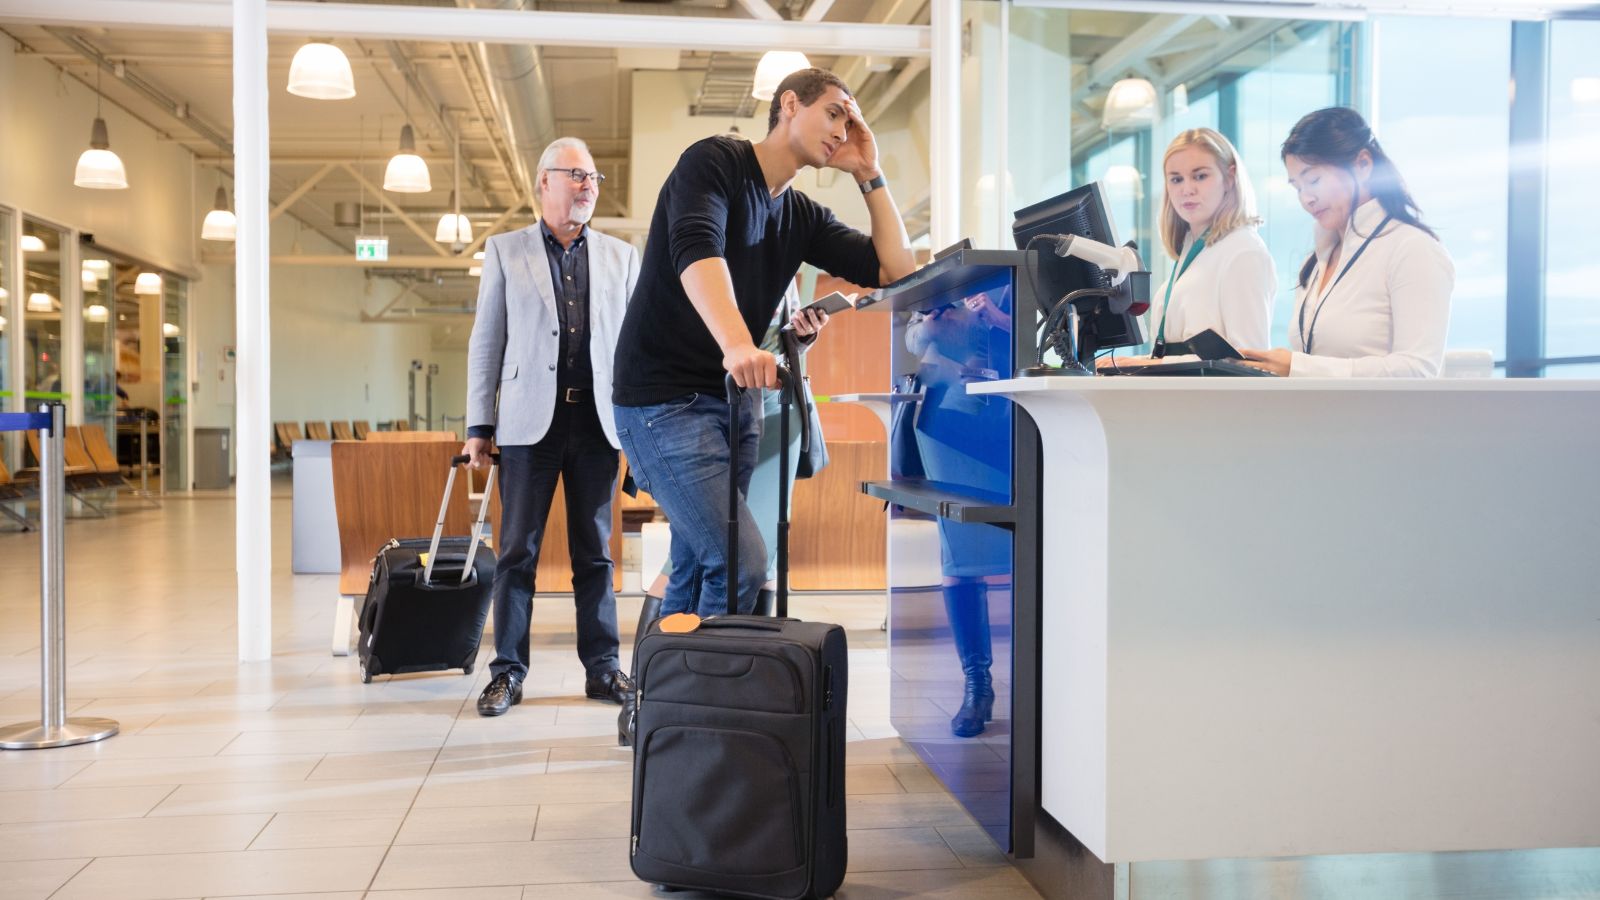 <p><a href="https://www.aviationpros.com/airlines/news/21270021/what-can-be-done-about-the-decline-of-customer-service">Aviation Pros</a> writes, “From airlines canceling flights at the last minute to core products simply not being available in stores, the rapid decline in customer service is evident almost everywhere in American society.” Many airlines also overbook and reduce their in-flight amenities. Not only this, but there’s also been a decrease in the response to customer complaints.</p>